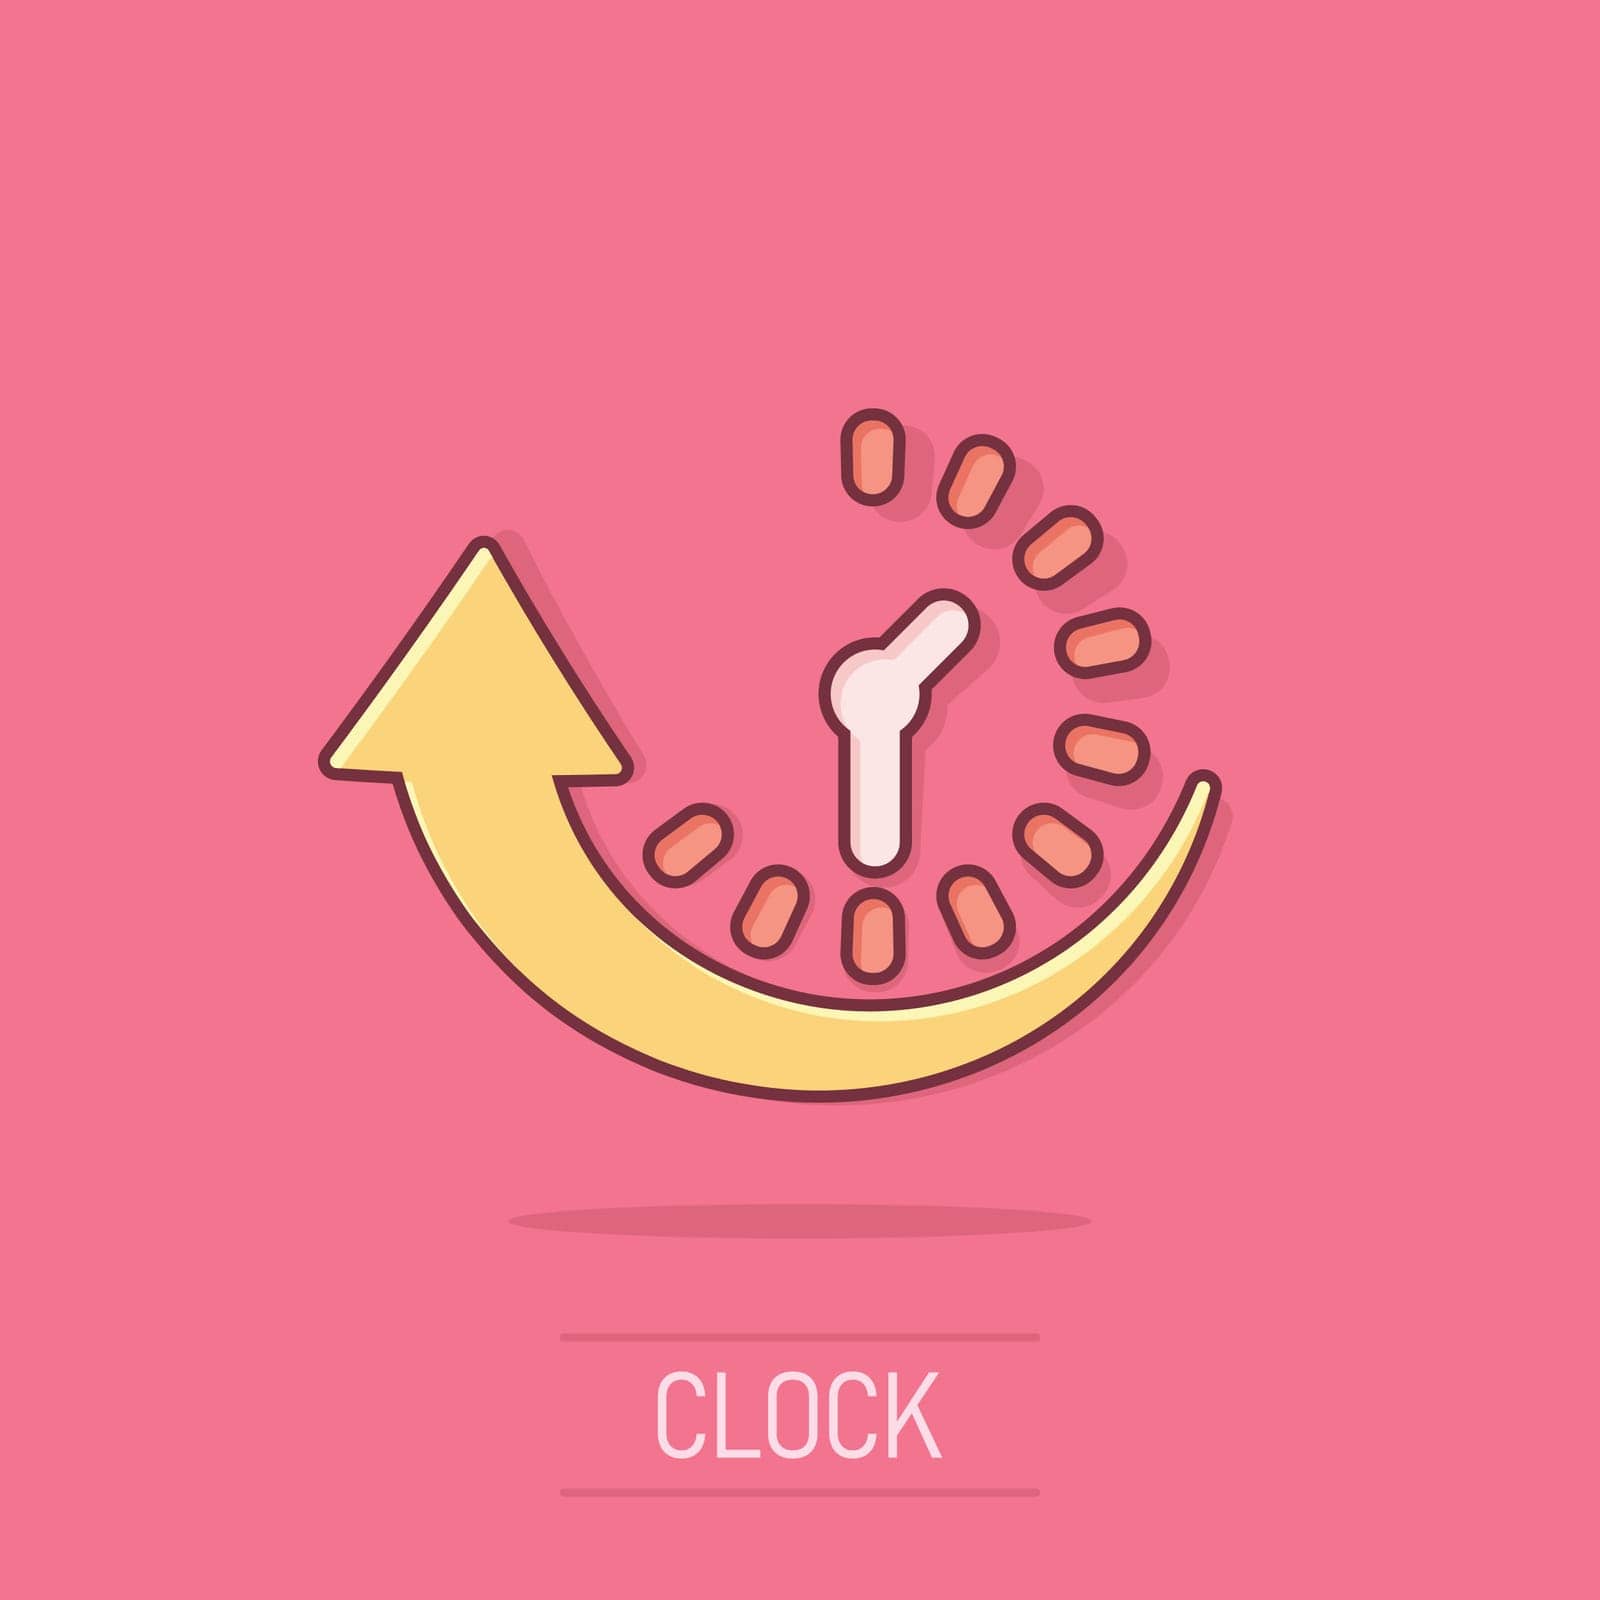 Downtime icon in comic style. Uptime vector cartoon illustration on white isolated background. Clock business concept splash effect. by LysenkoA